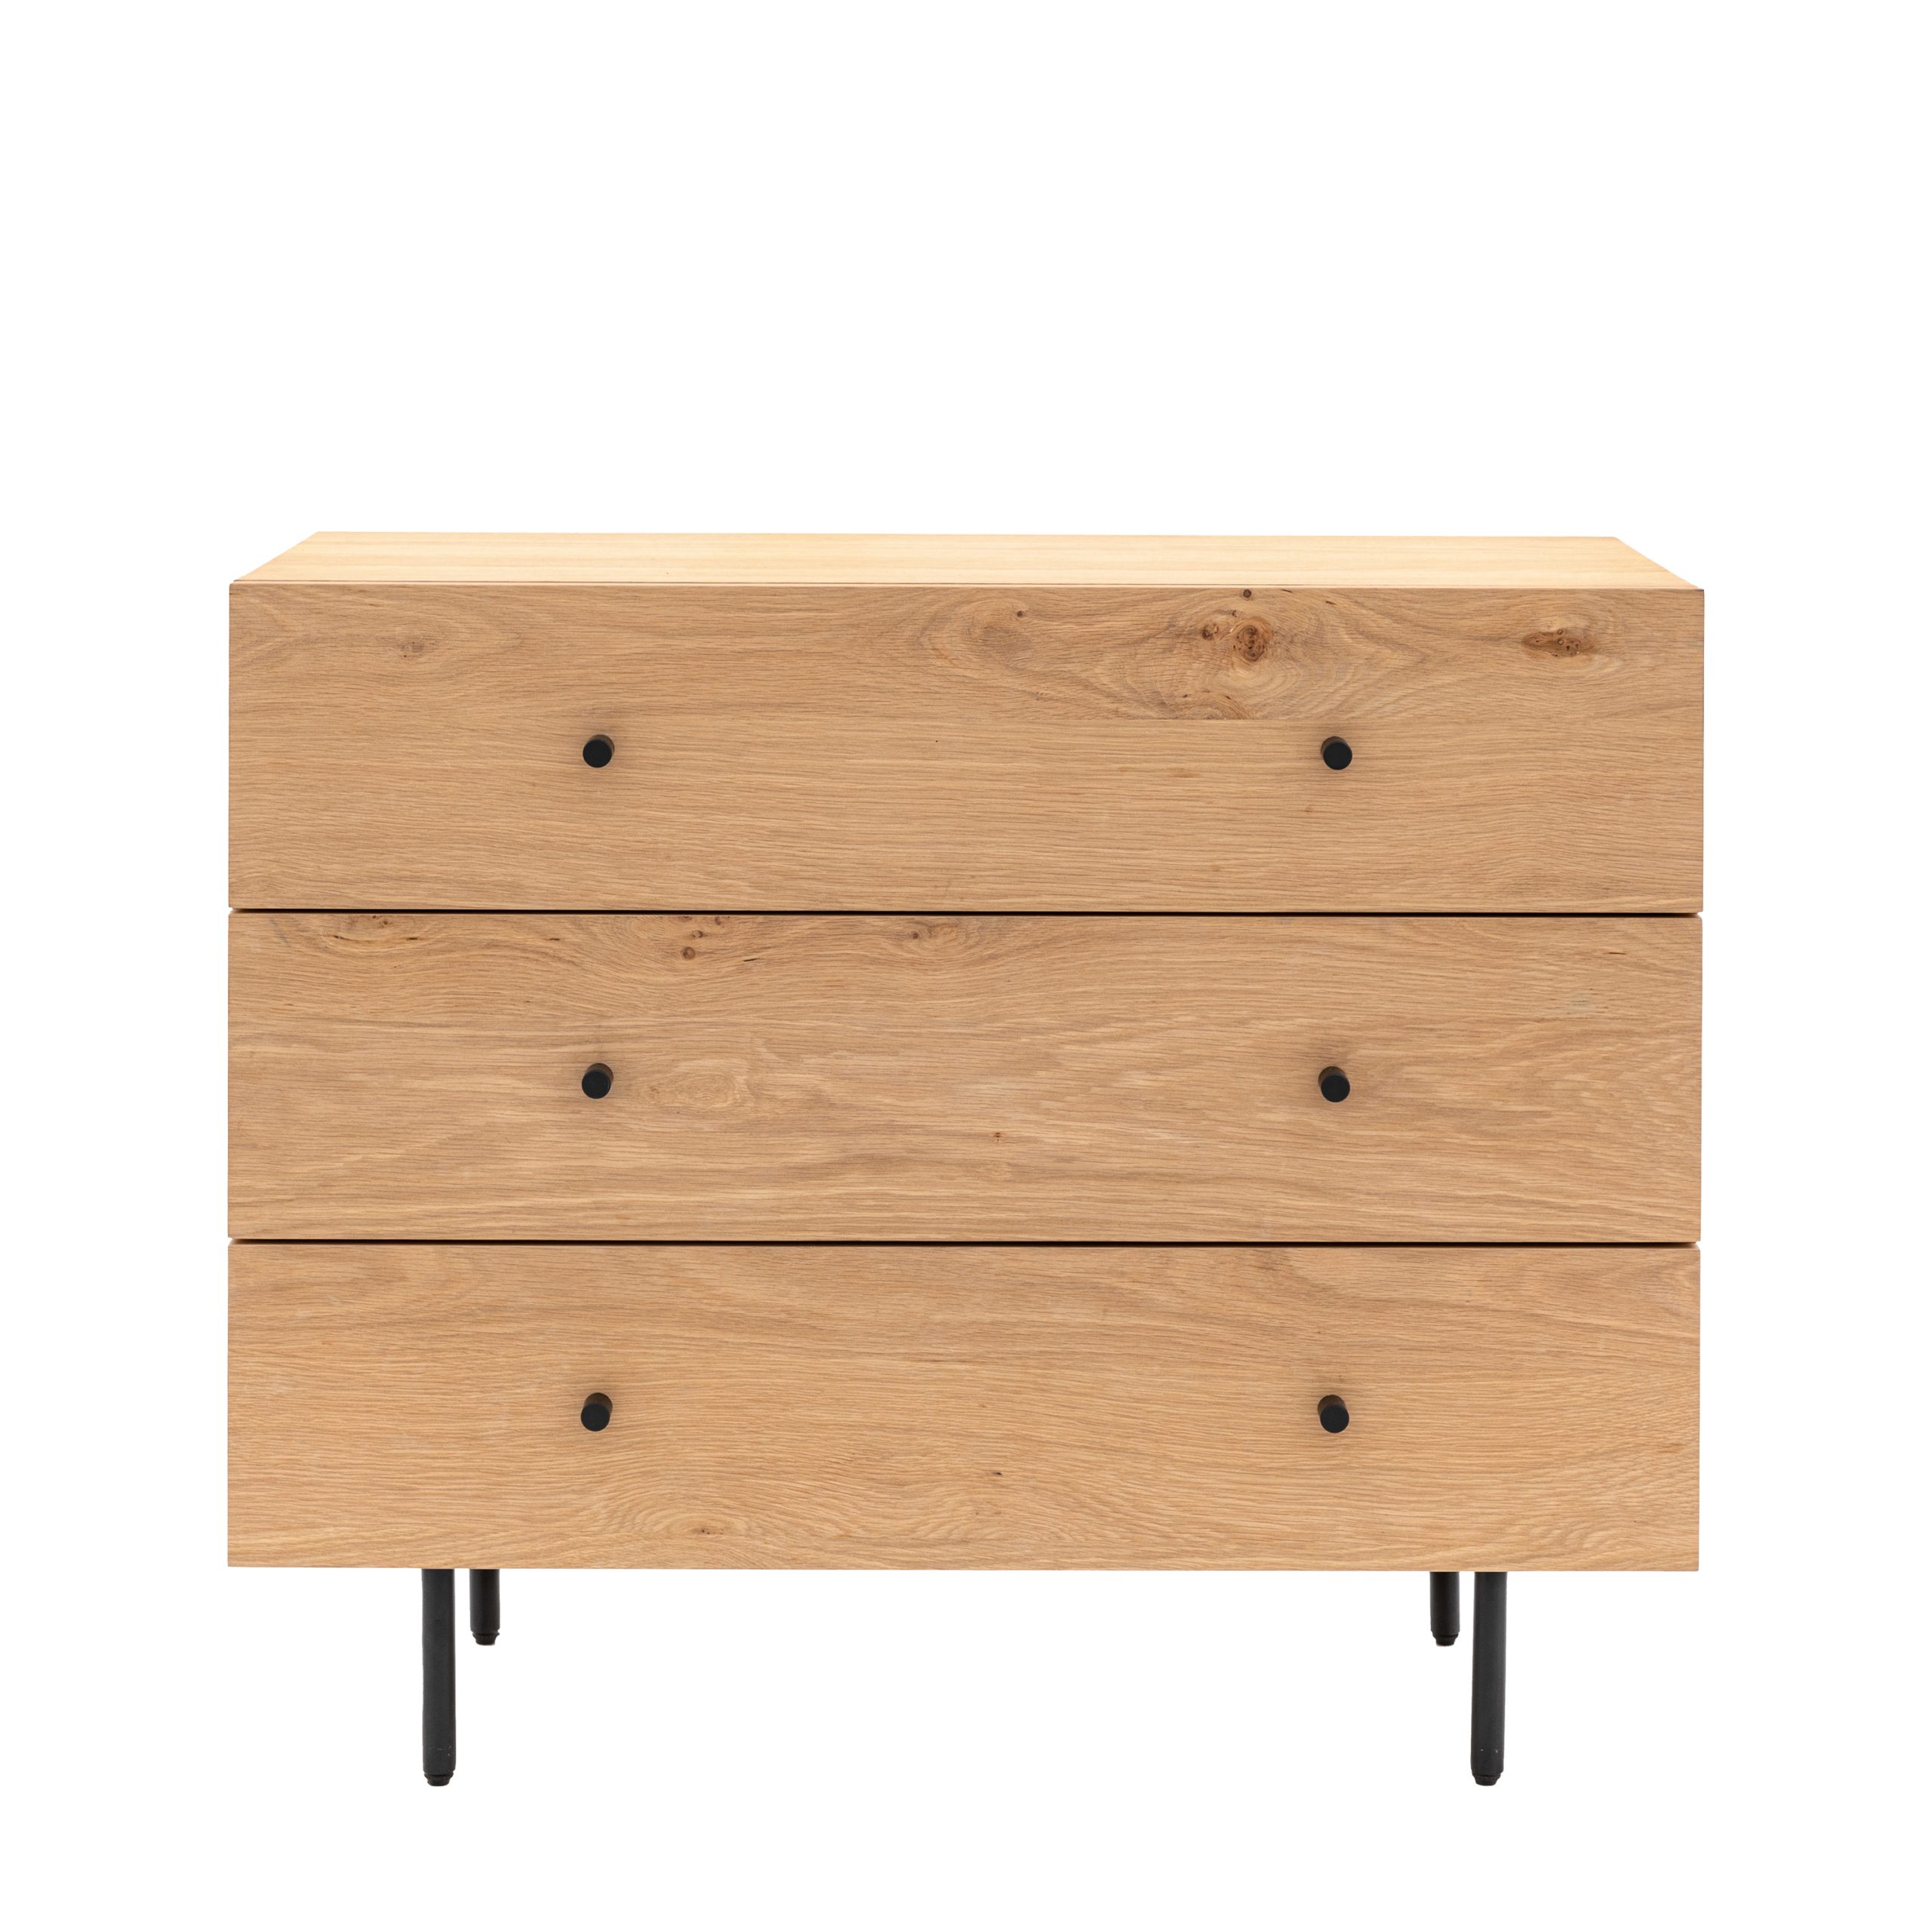 Gallery Direct Ashdown 3 Drawer Chest Natural